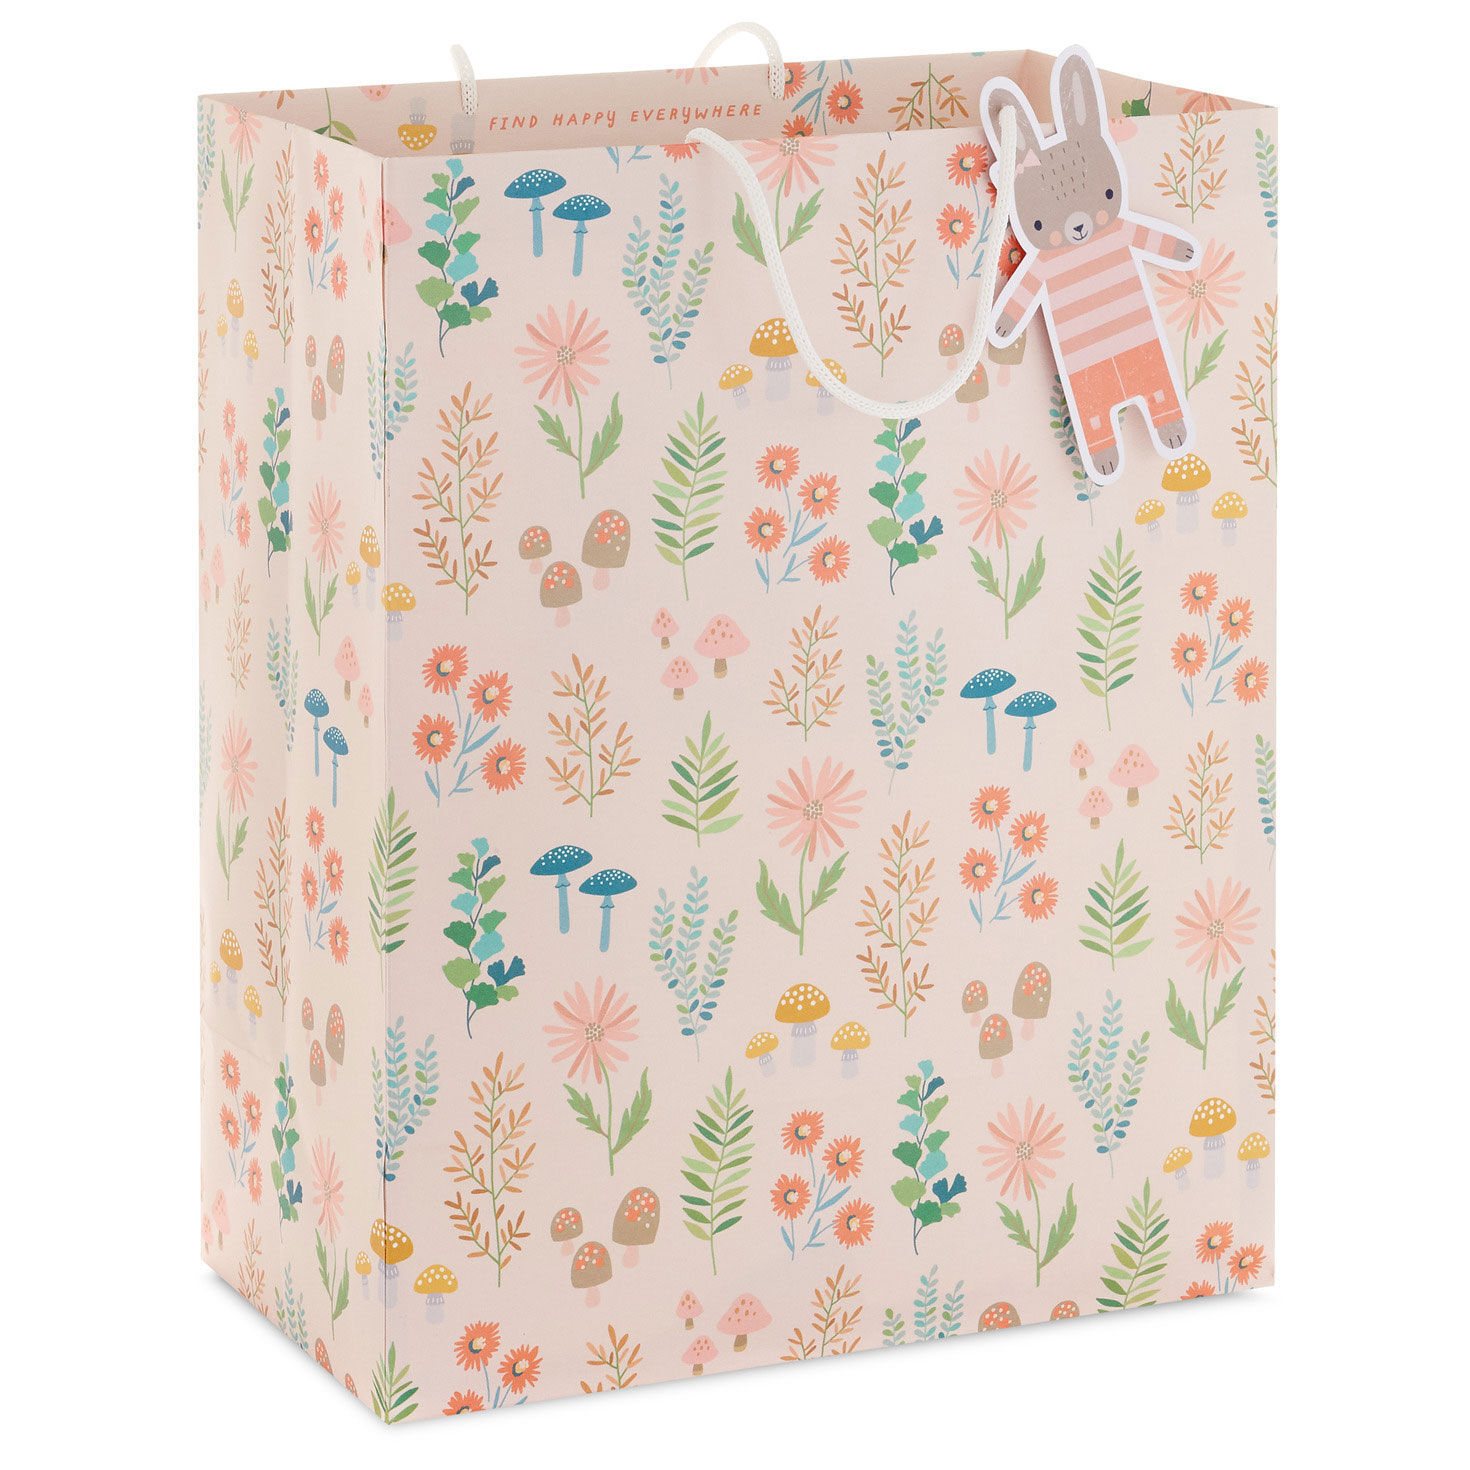 13" Woodland Flowers Large Gift Bag for only USD 4.99 | Hallmark